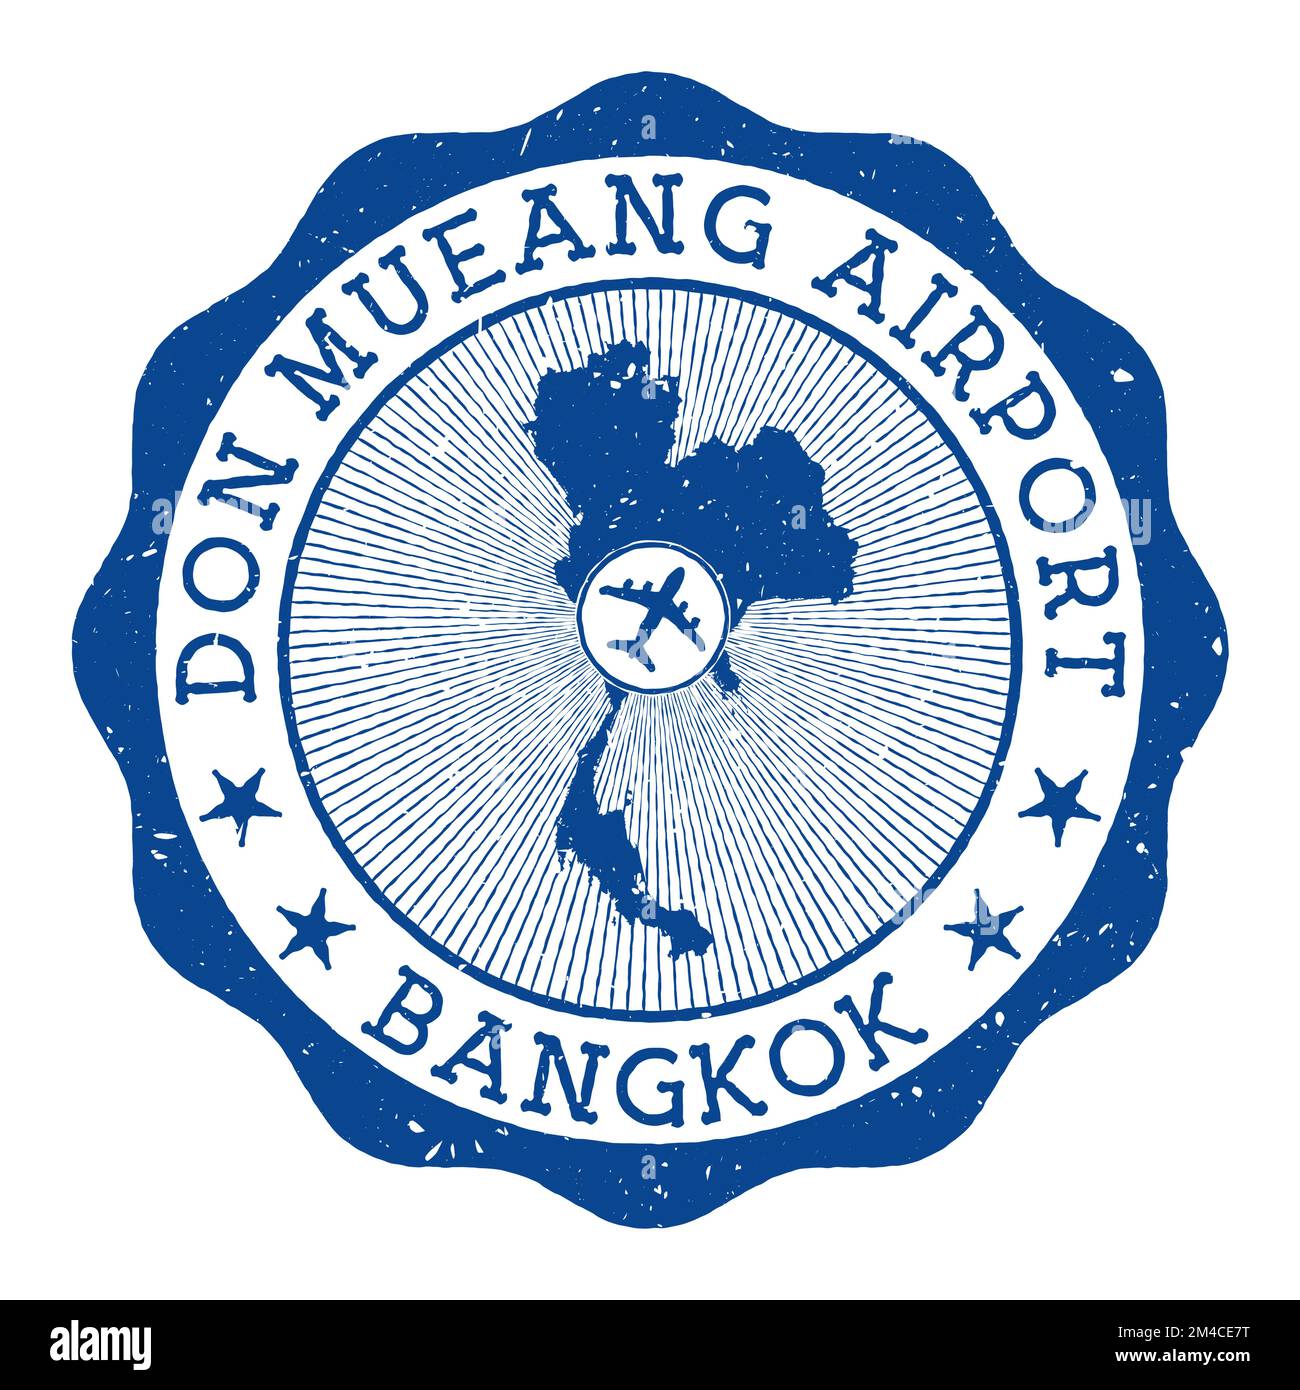 Don Mueang Airport Bangkok stamp. Airport of Bangkok round logo with location on Thailand map marked by airplane. Vector illustration. Stock Vector